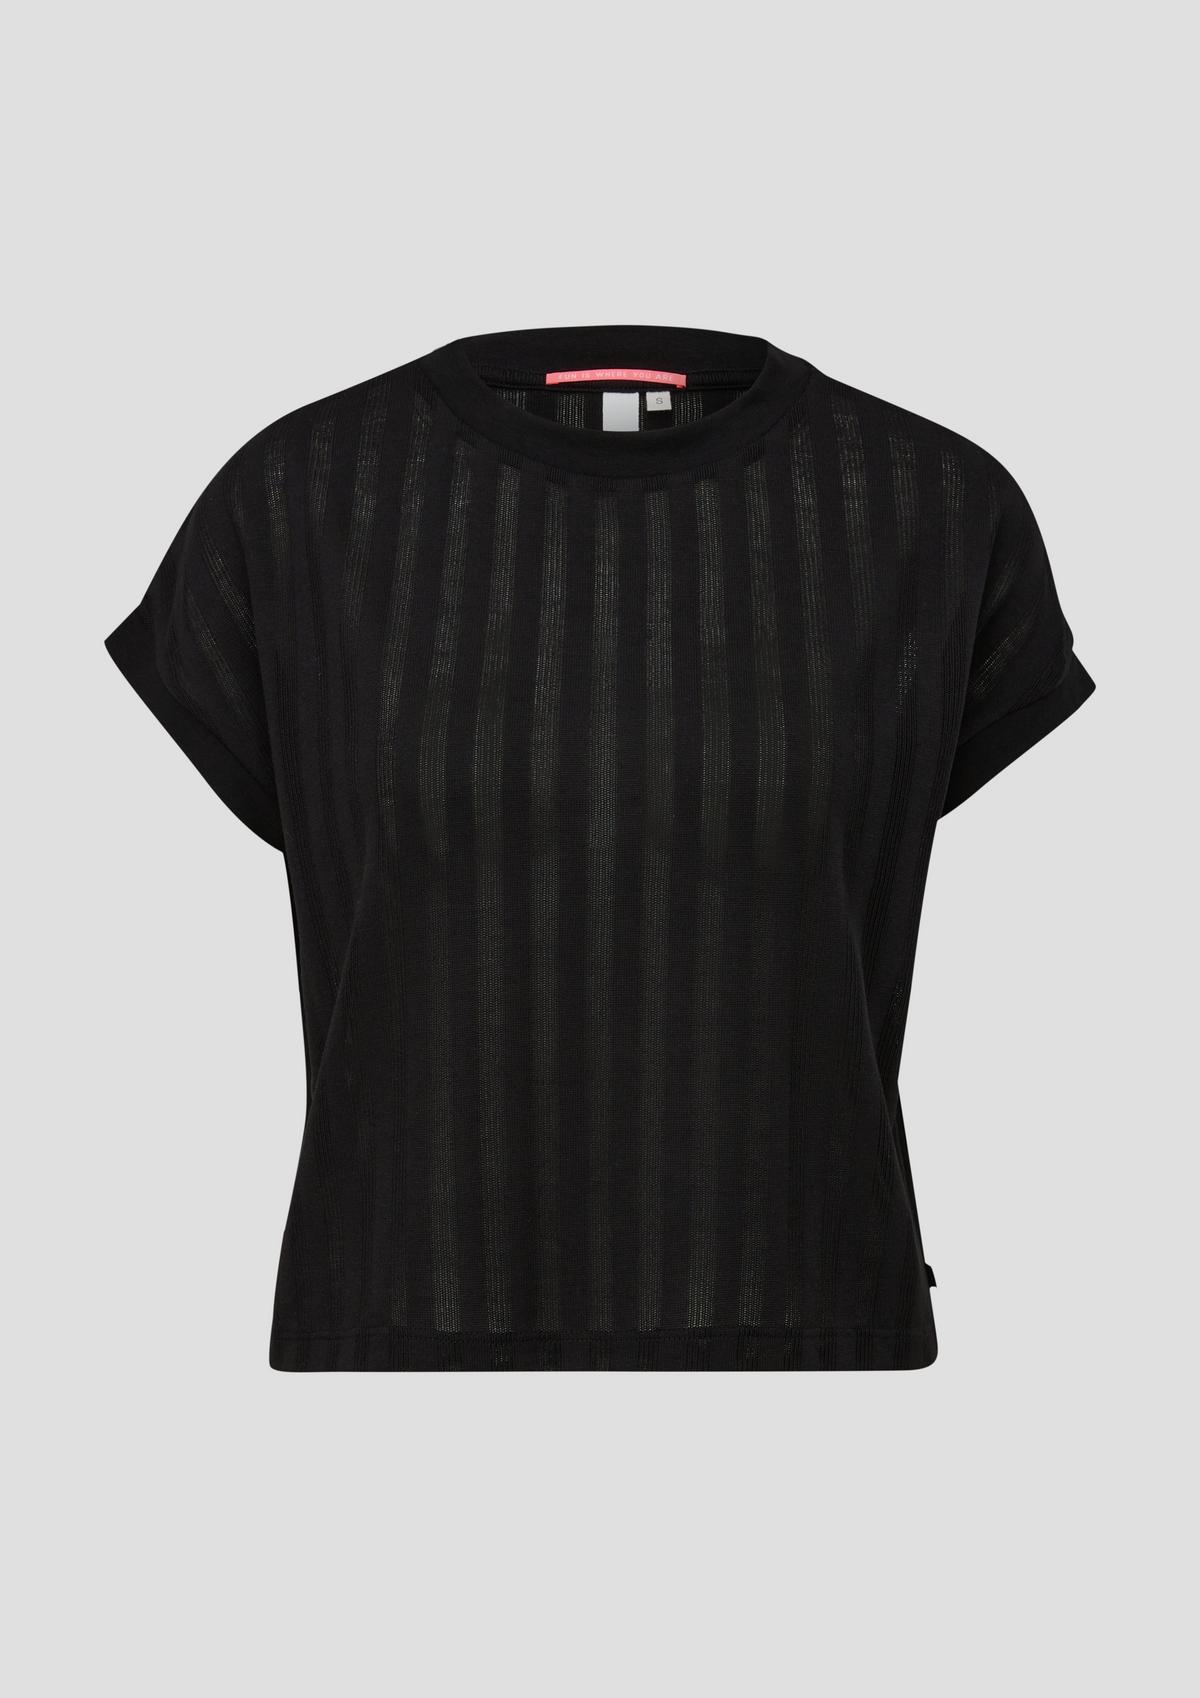 s.Oliver T-shirt with a patterned texture